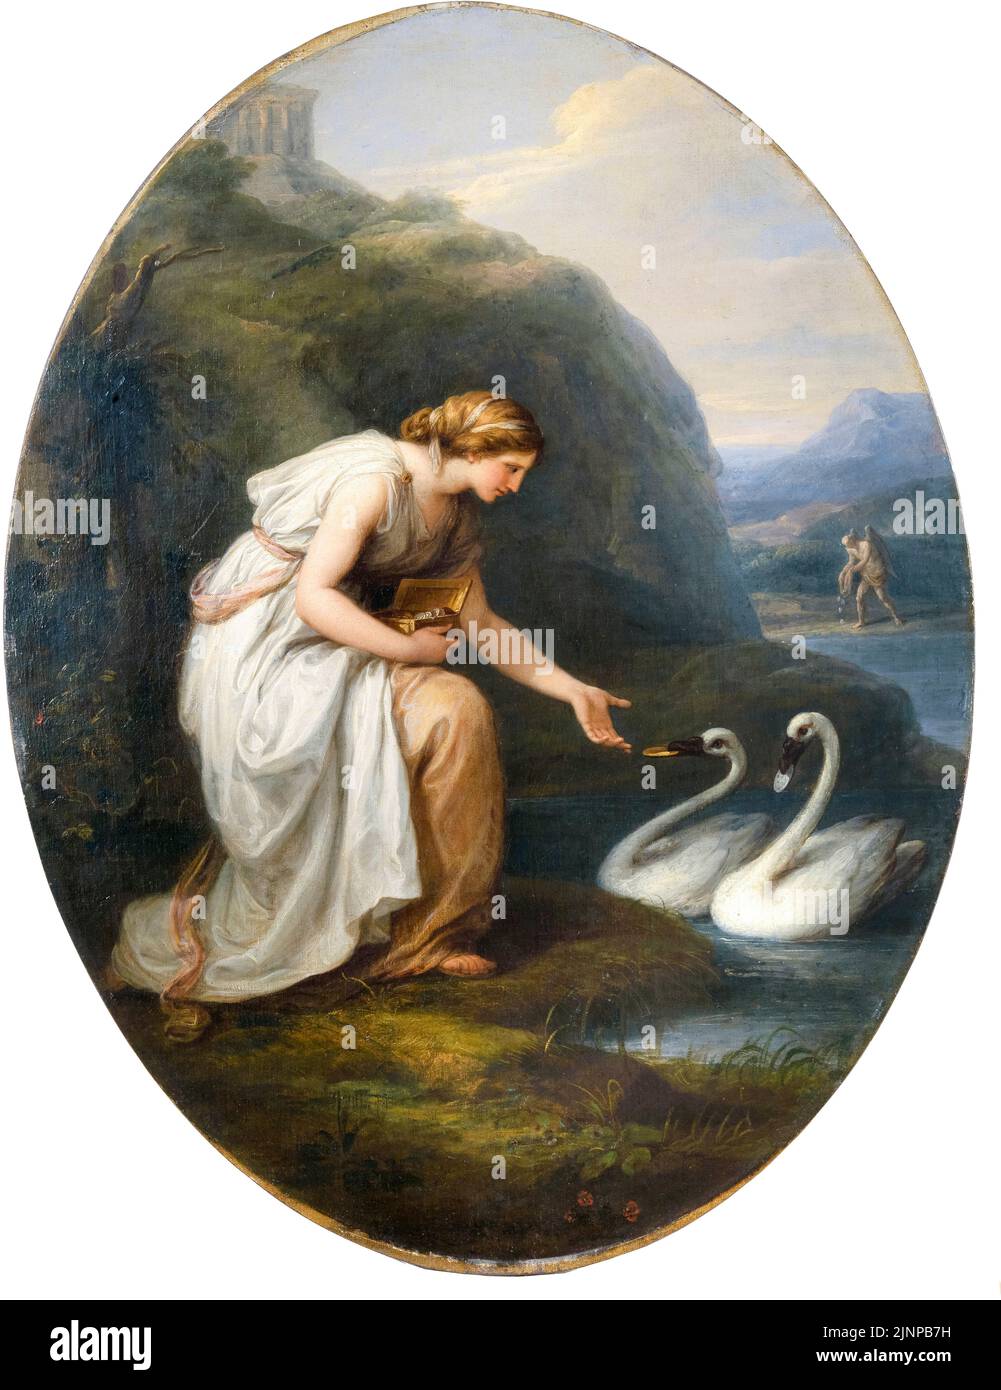 Angelica Kauffman, Immortalia, the nymph of immortality, receiving nameplates from two swans, painting in oil on canvas mounted on panel, before 1807 Stock Photo